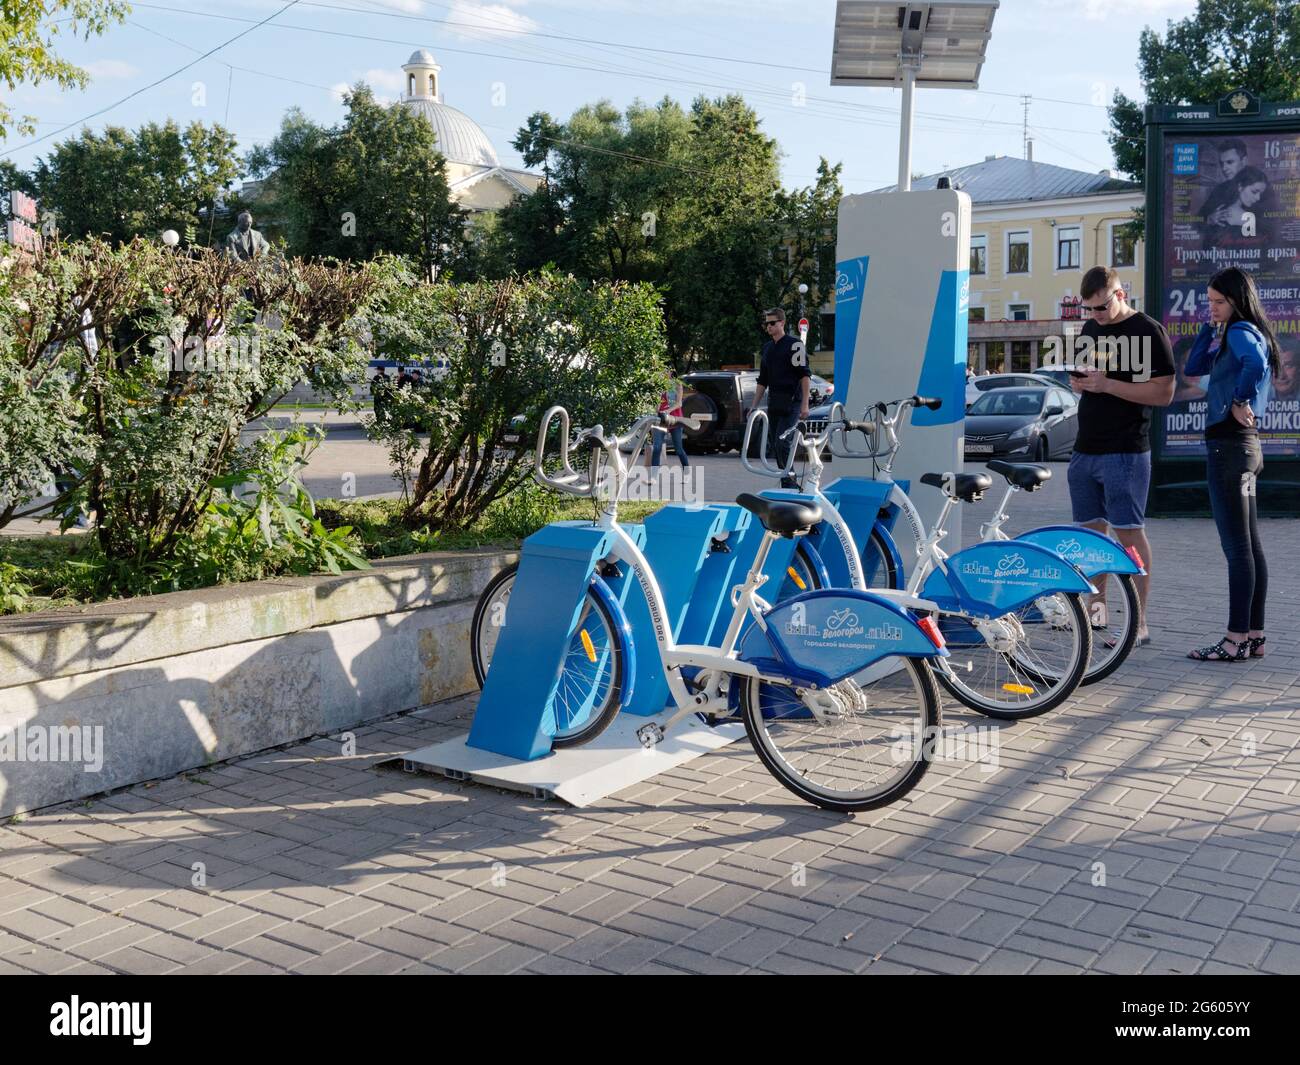 St. Petersburg, Russia, 9th August, 2017: People renting a bicycle at the bike rental station of Velogorod project Stock Photo